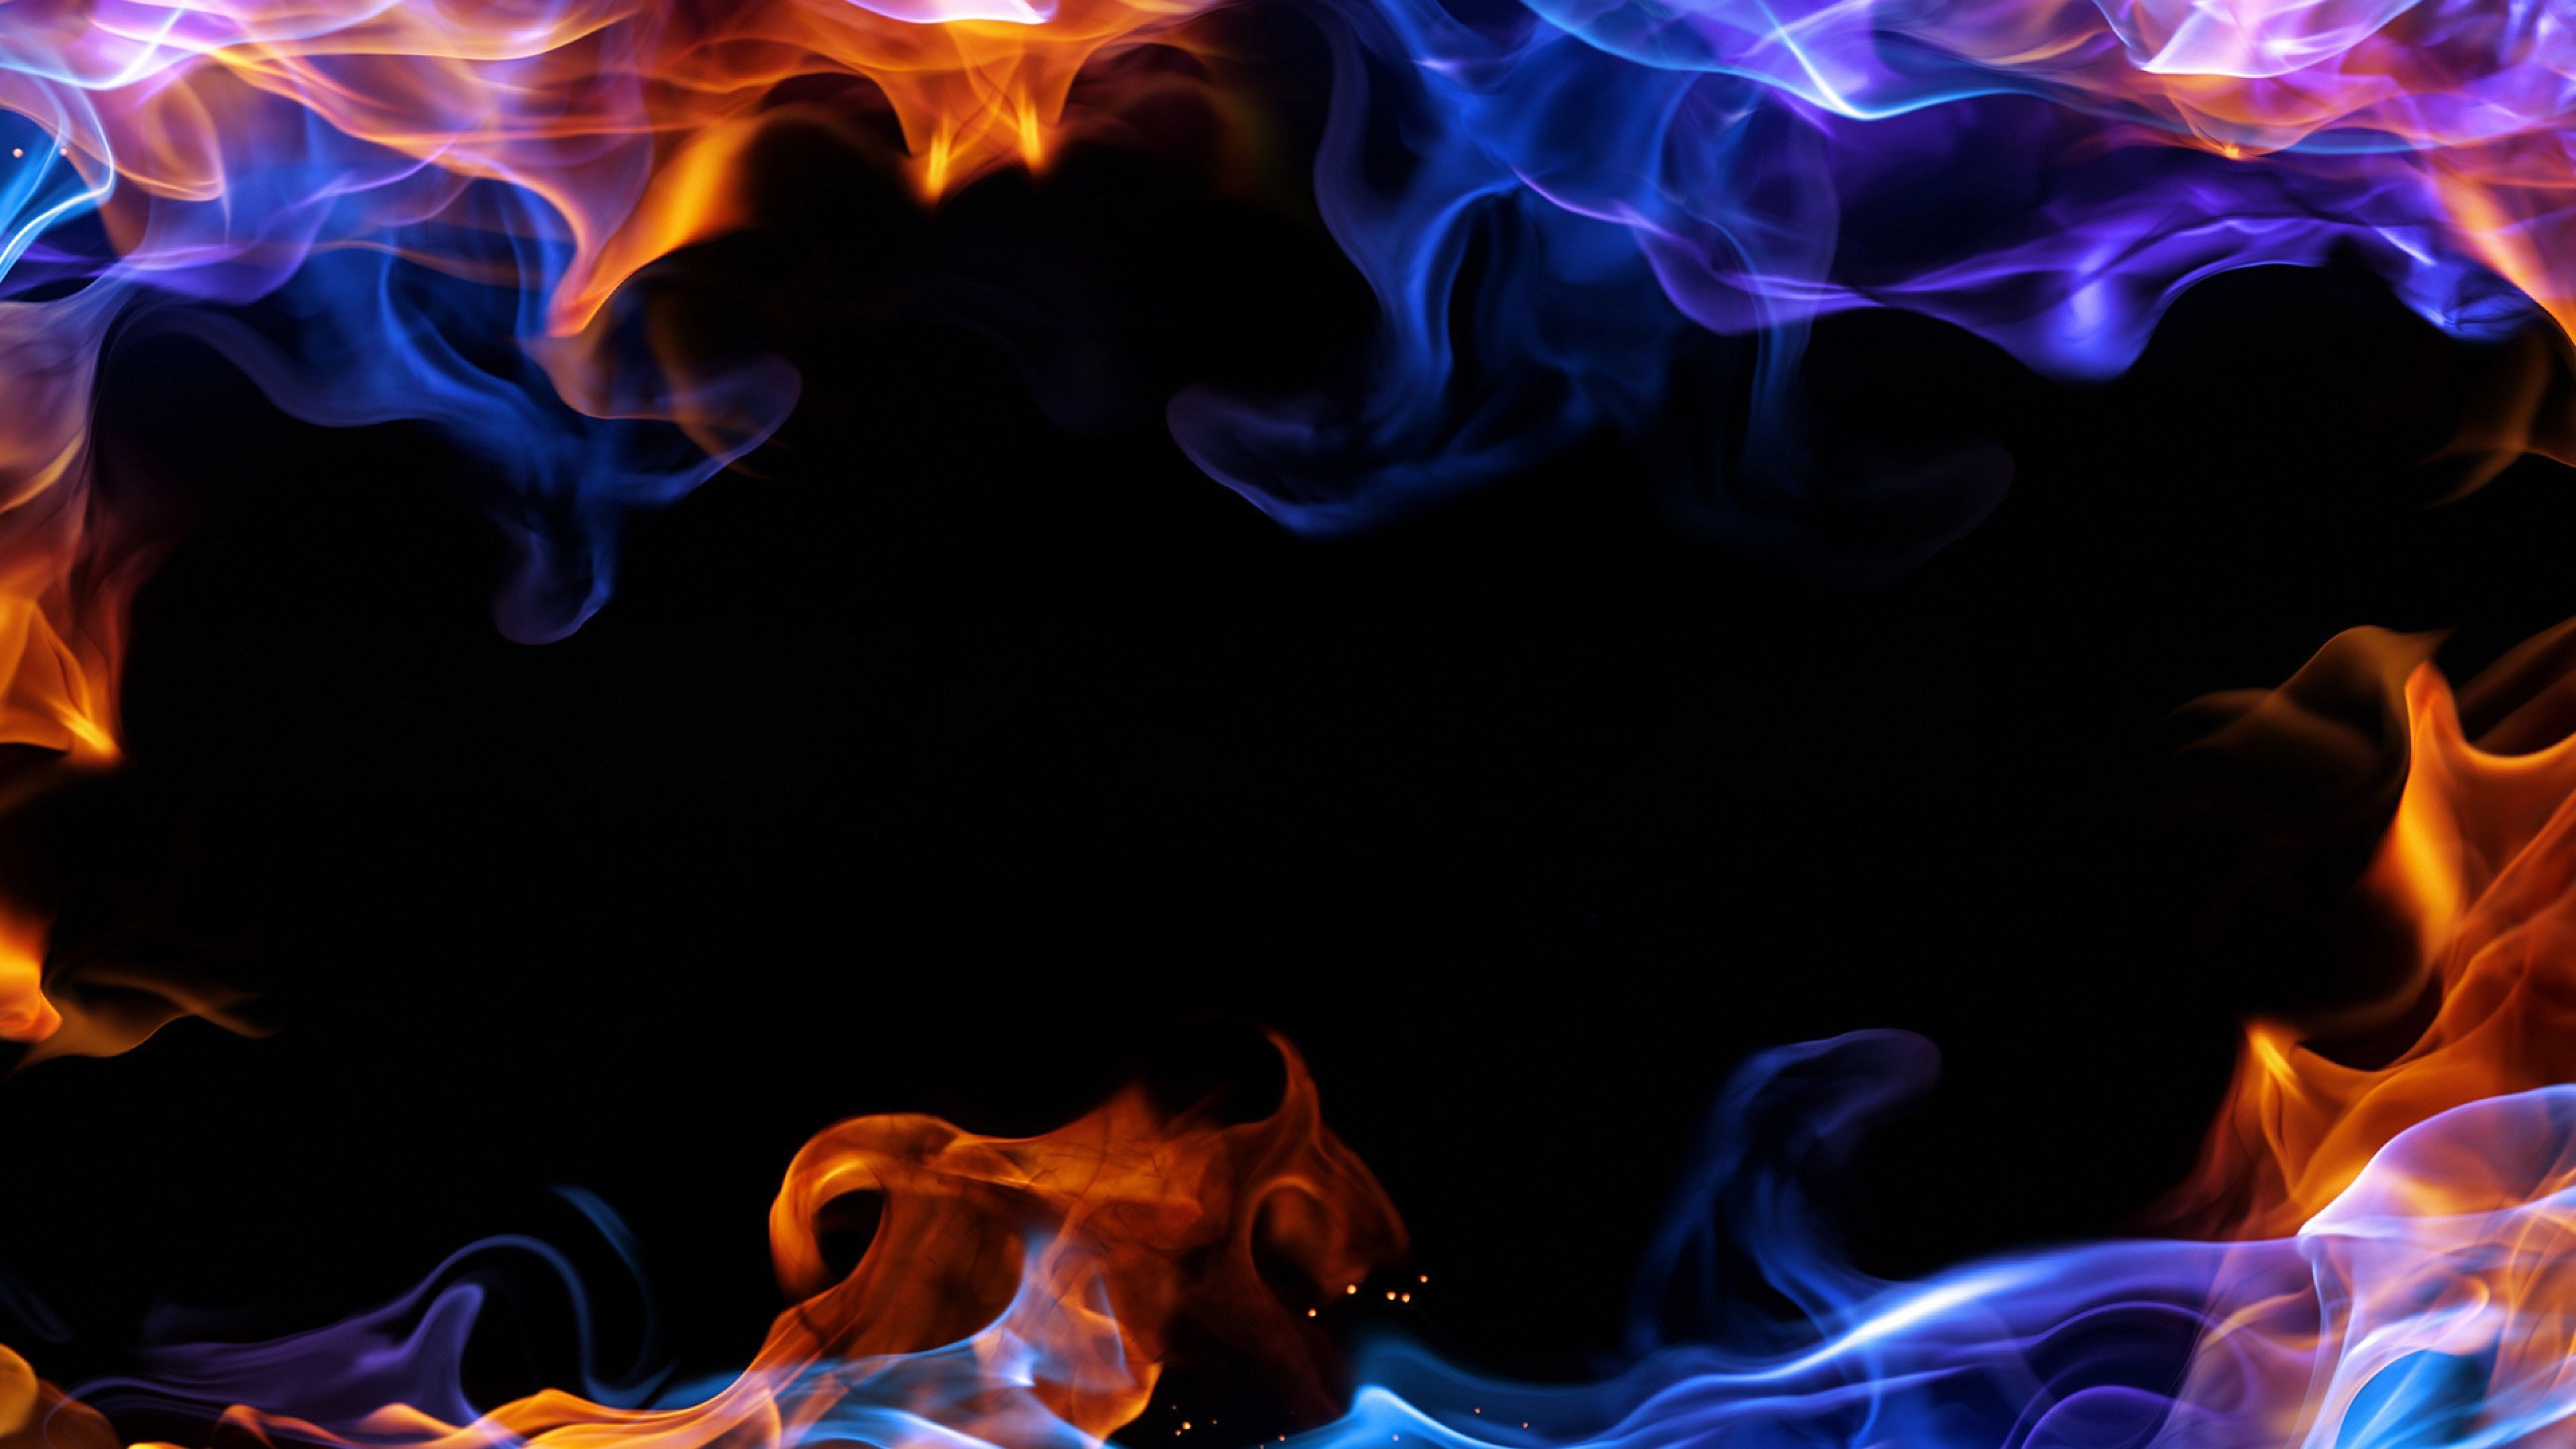 Download Wallpaper 3840x2160 Smoke, Background, Play of light